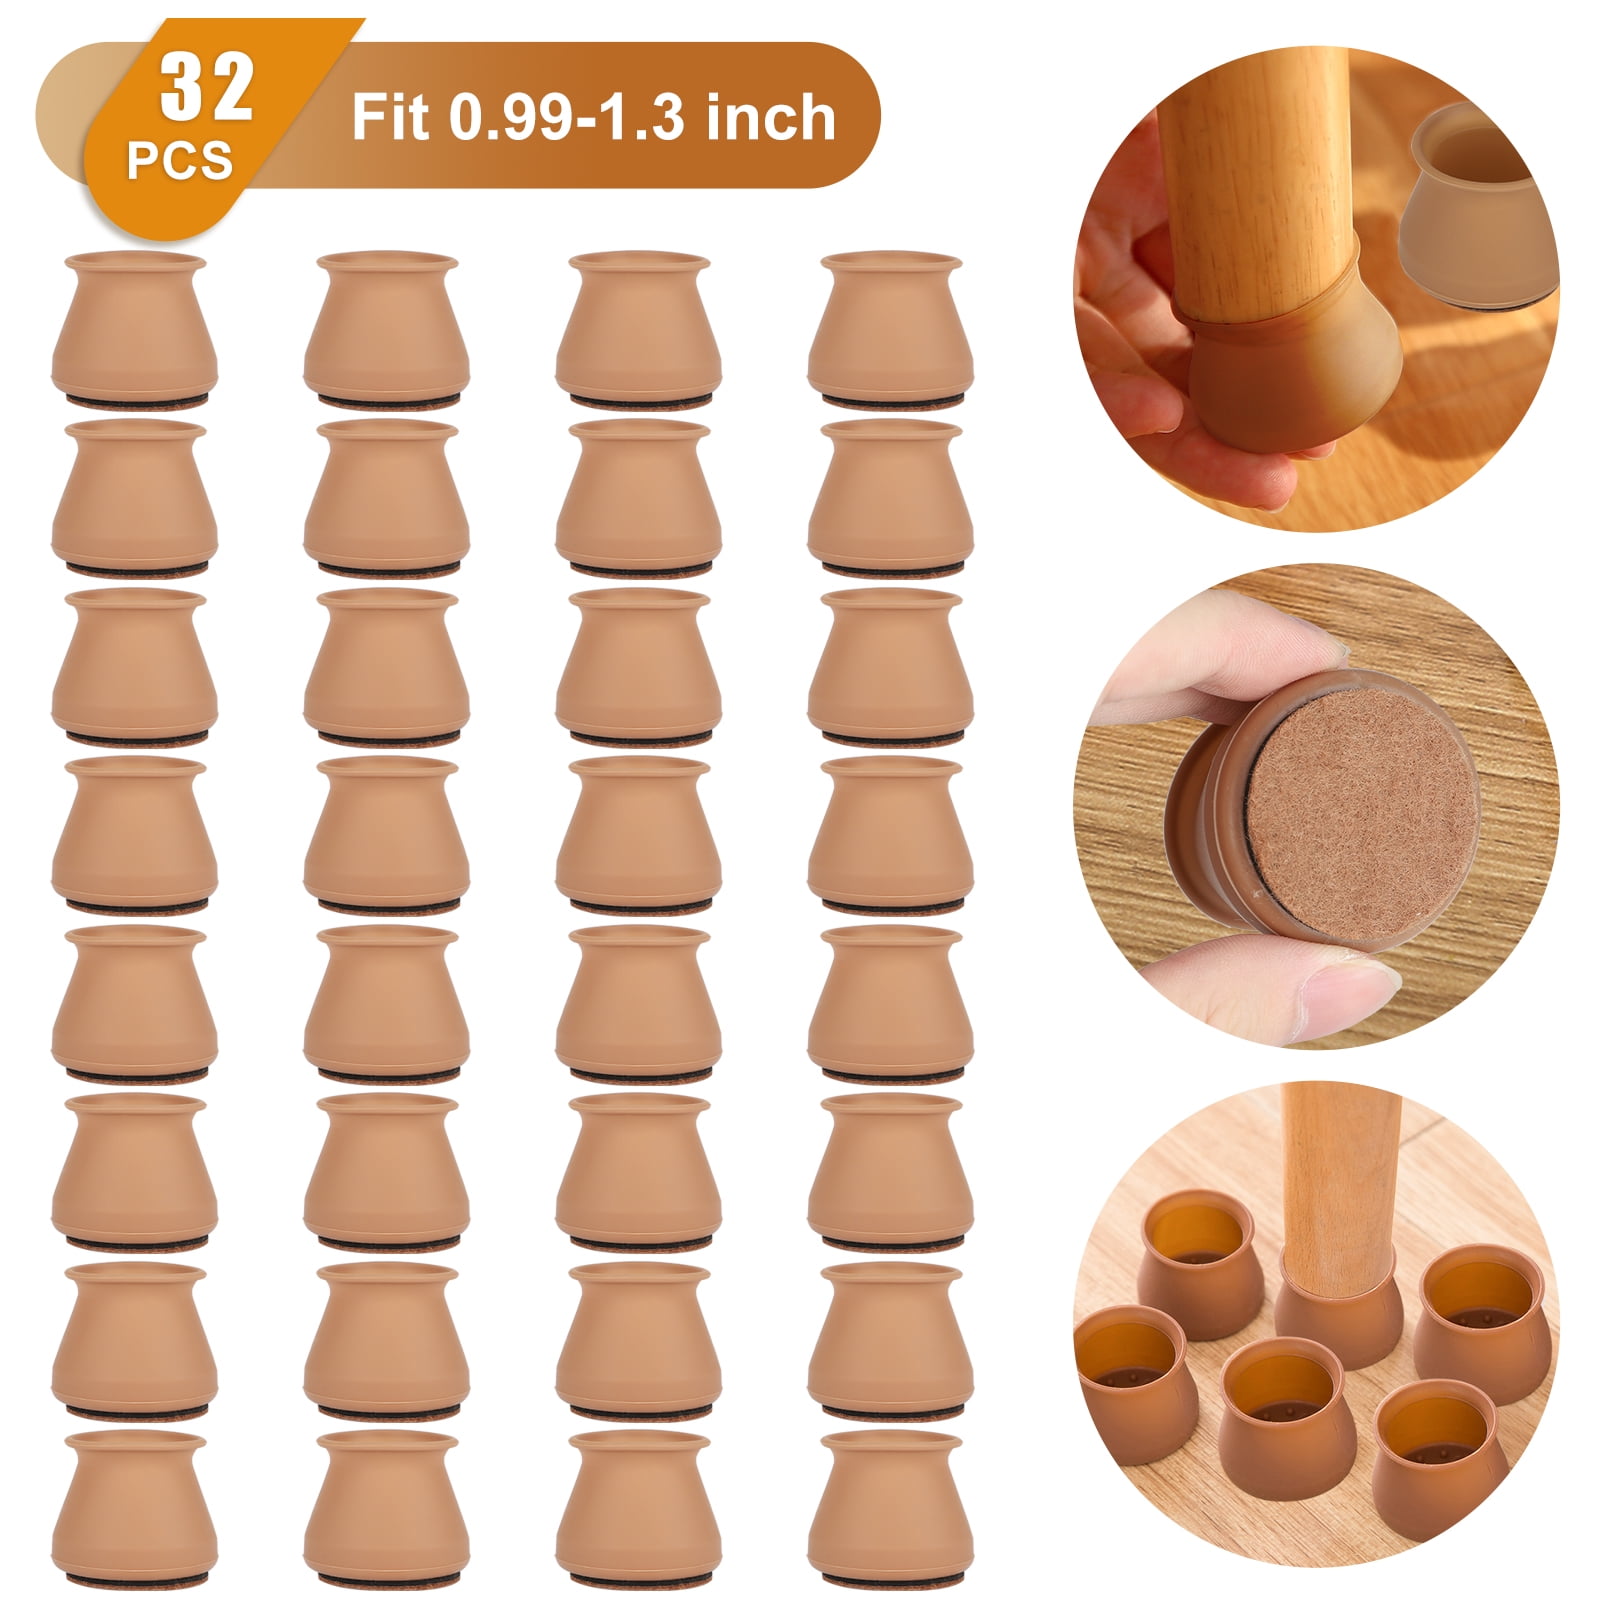 Andux 8Pcs/Set Round Bottom Silicone Wood Floor Protectors Chair Leg Caps Furniture Feet Pads Table Covers Anti-Slip Prevent Scratches Clear-GJZJD-01 4 # 